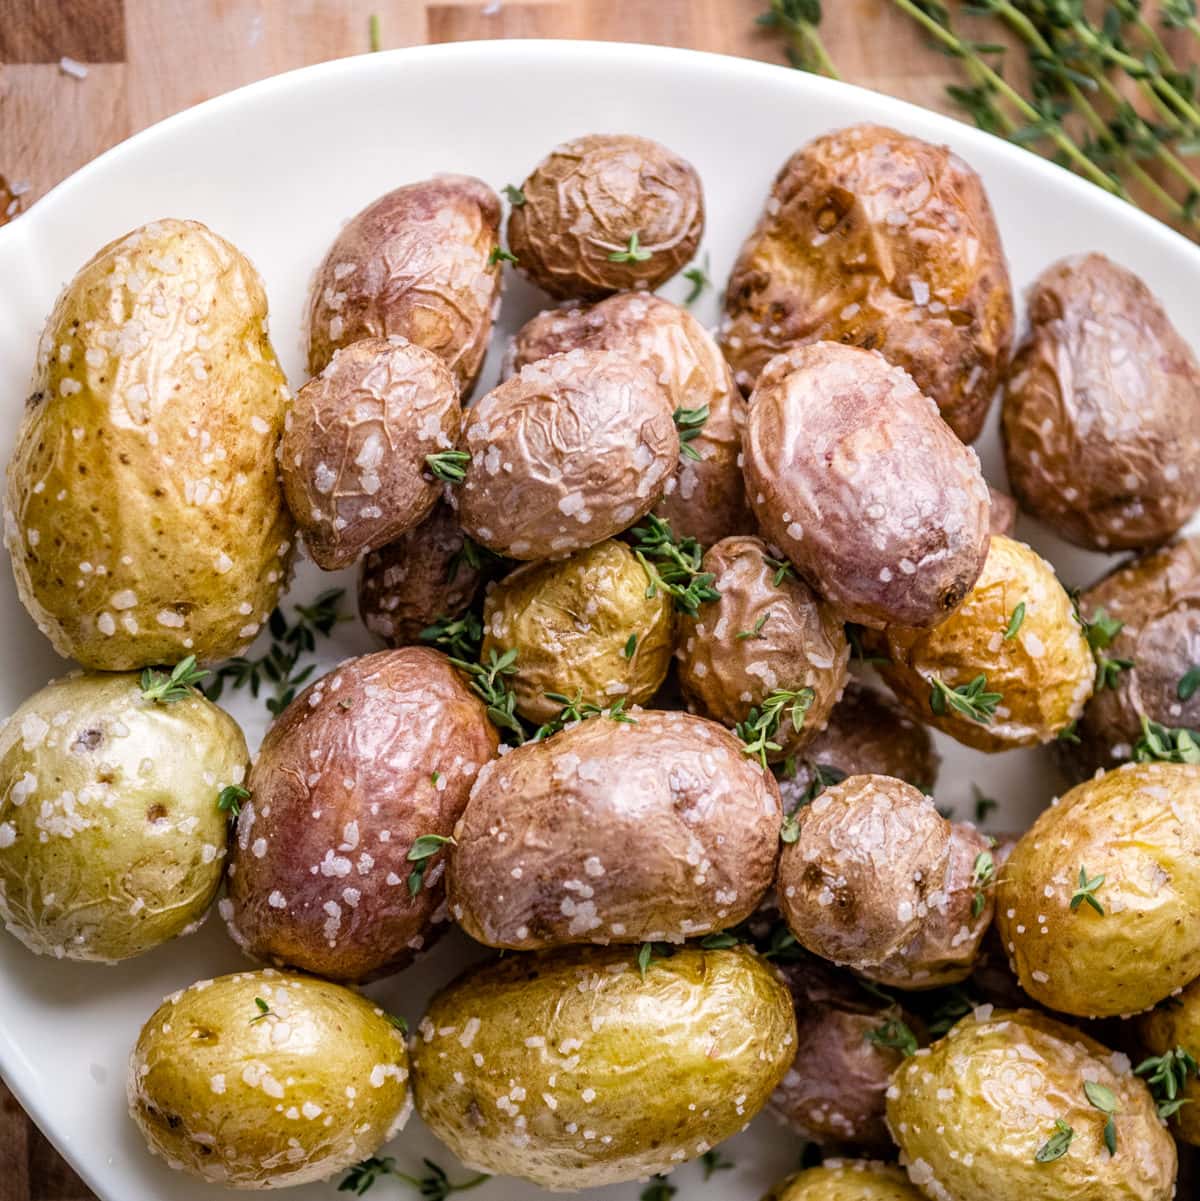 Top view of a plate of yellow and purple baby potatoes with salt.